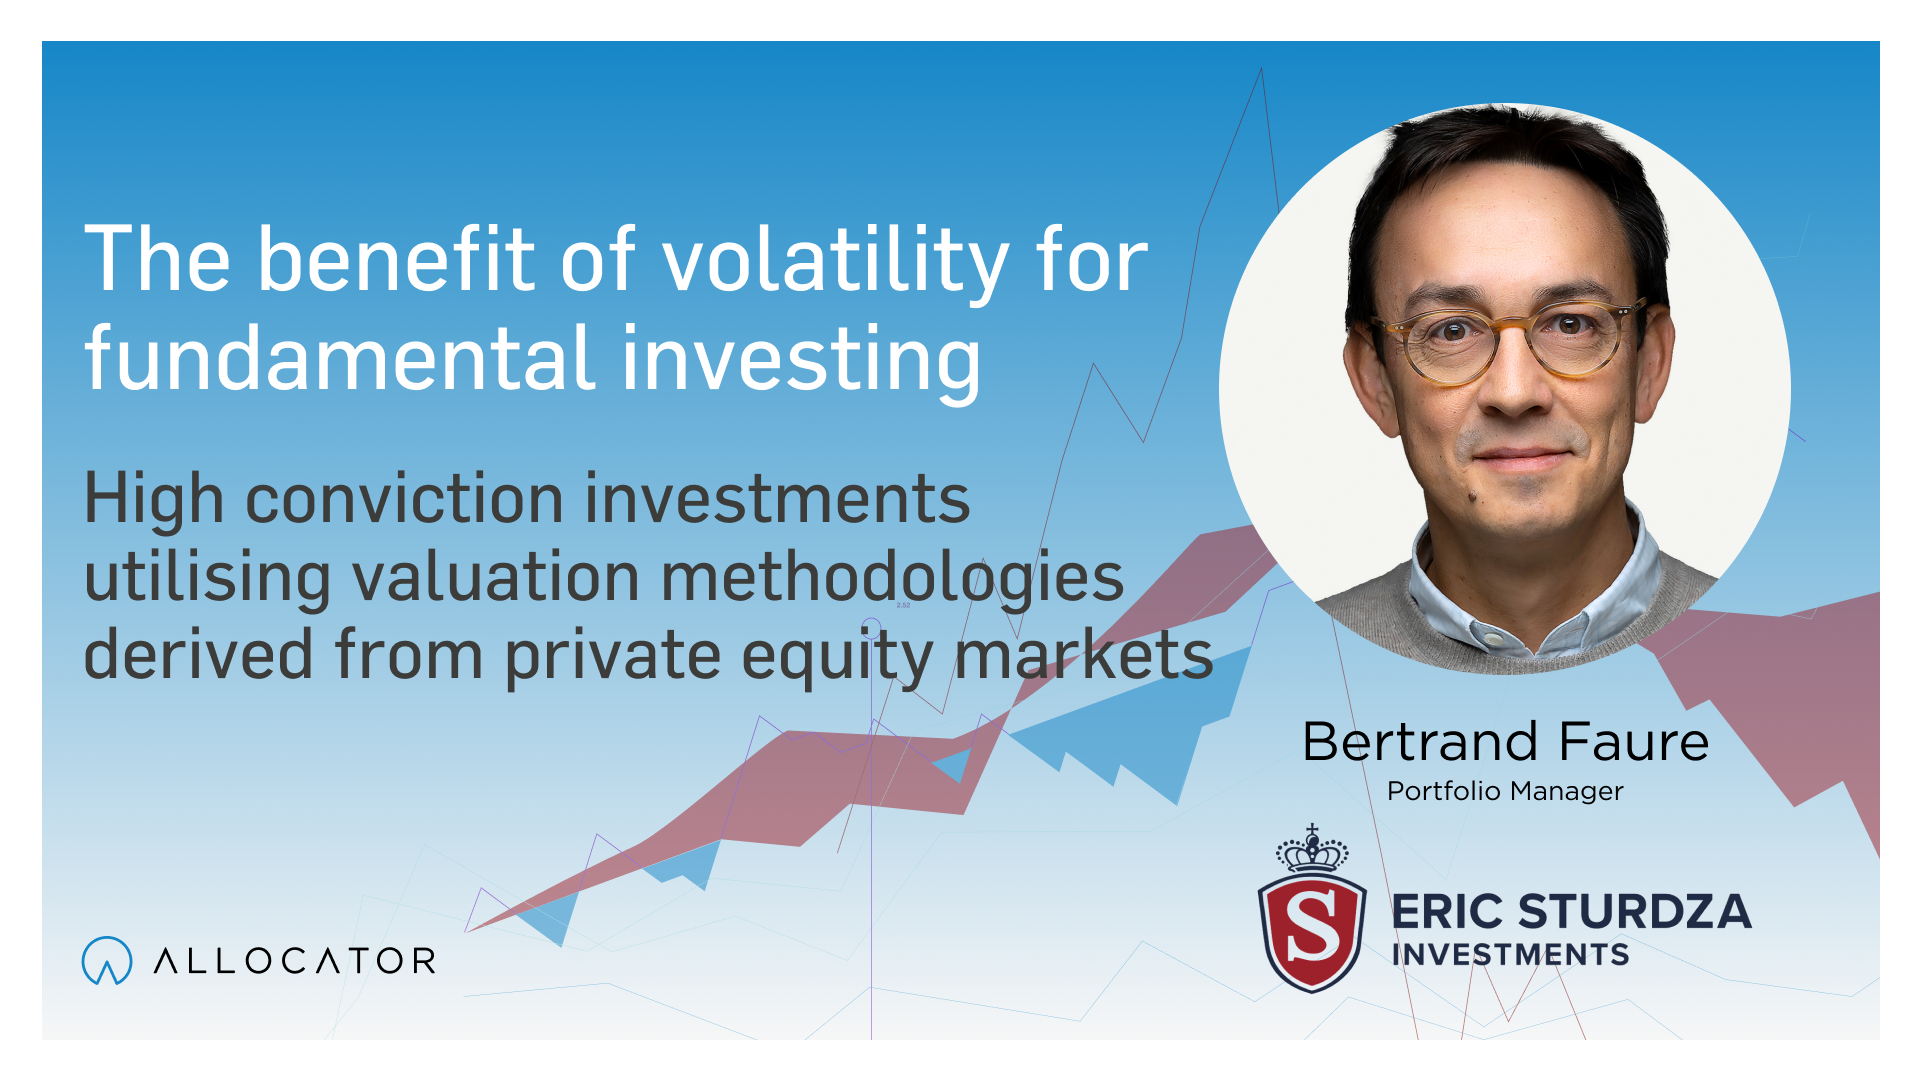 Eric Sturdza - The benefit of volatility for fundamental investing